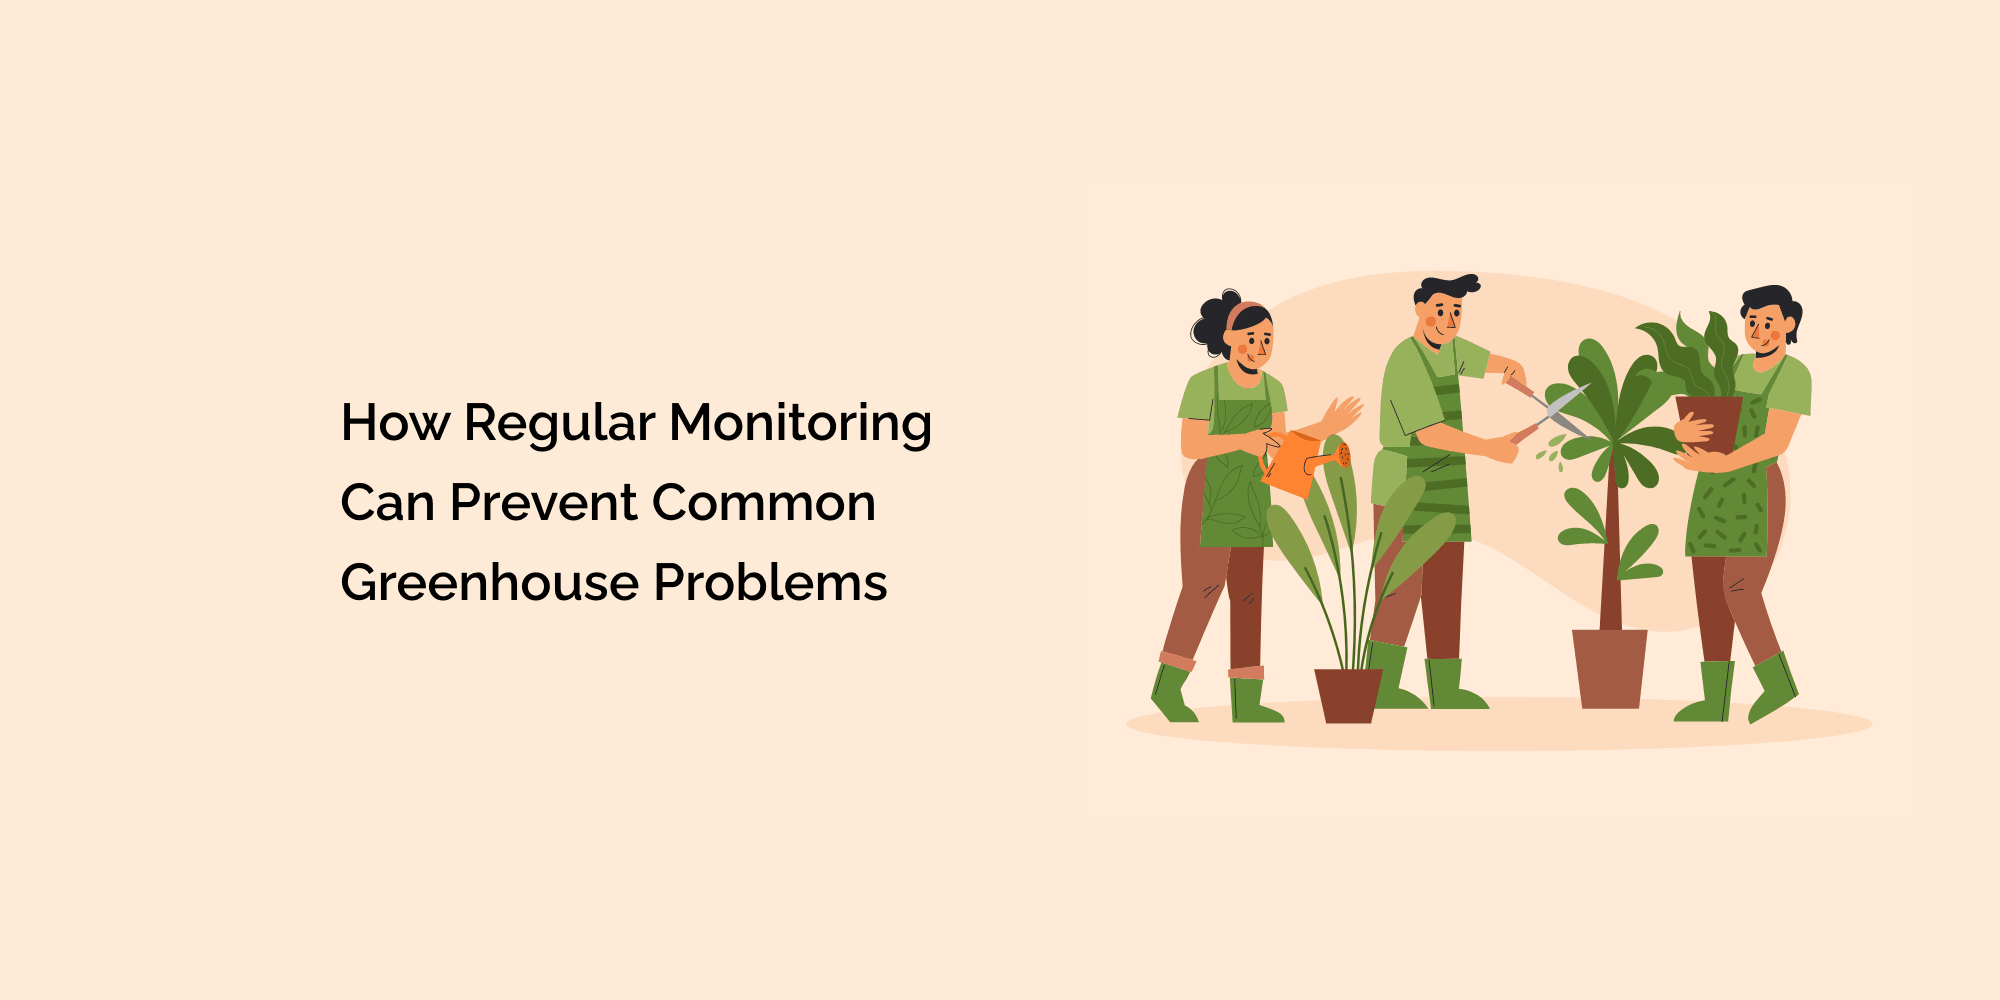 How Regular Monitoring Can Prevent Common Greenhouse Problems